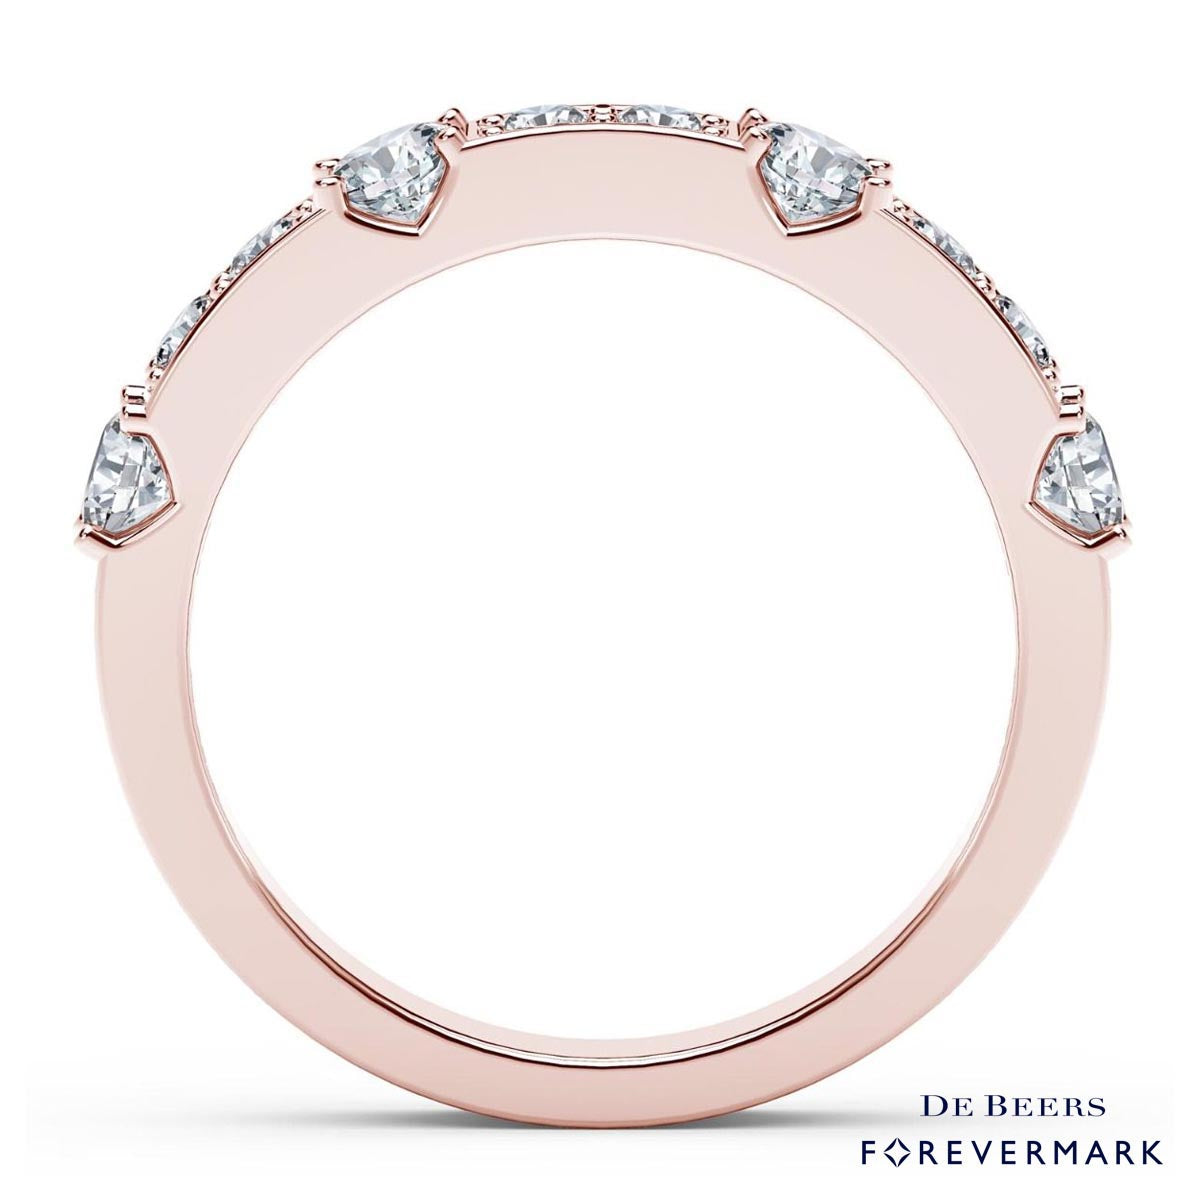 De Beers Forevermark Tribute Collection Diamond Stackable Ring in 18kt Rose Gold (5/8ct tw)